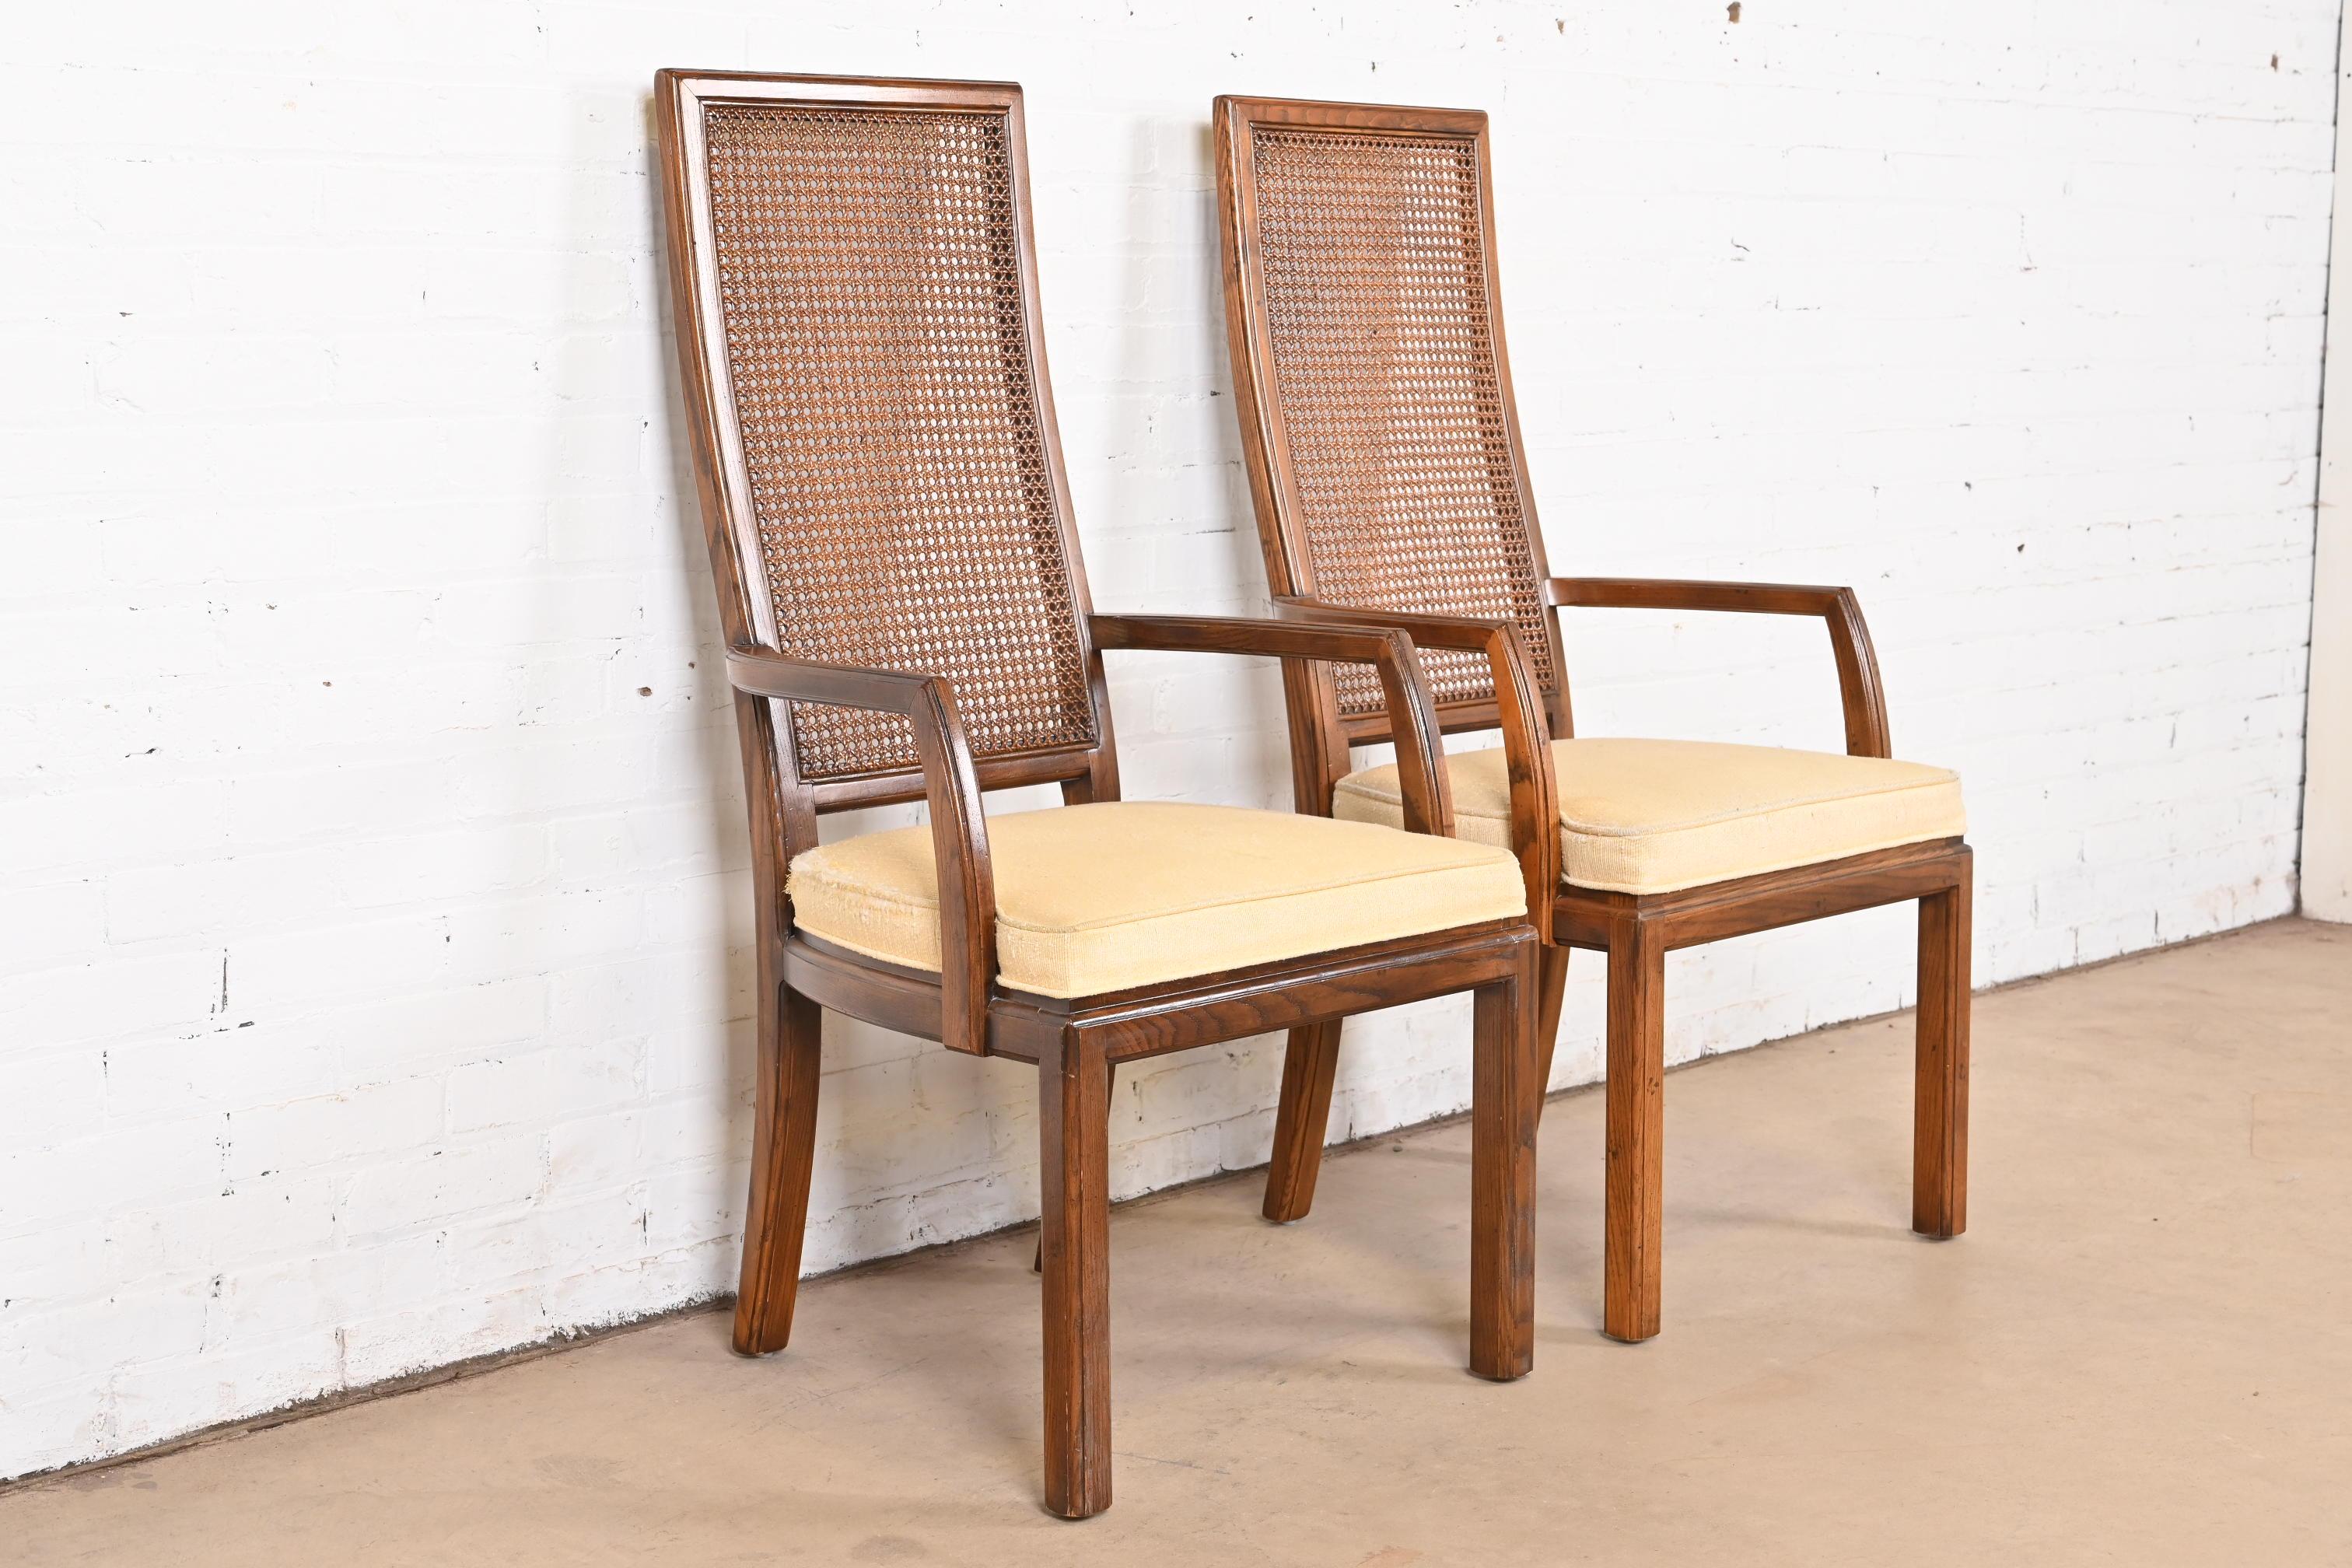 Henredon Mid-Century Modern Oak and Cane High Back Dining Arm Chairs, Pair For Sale 1